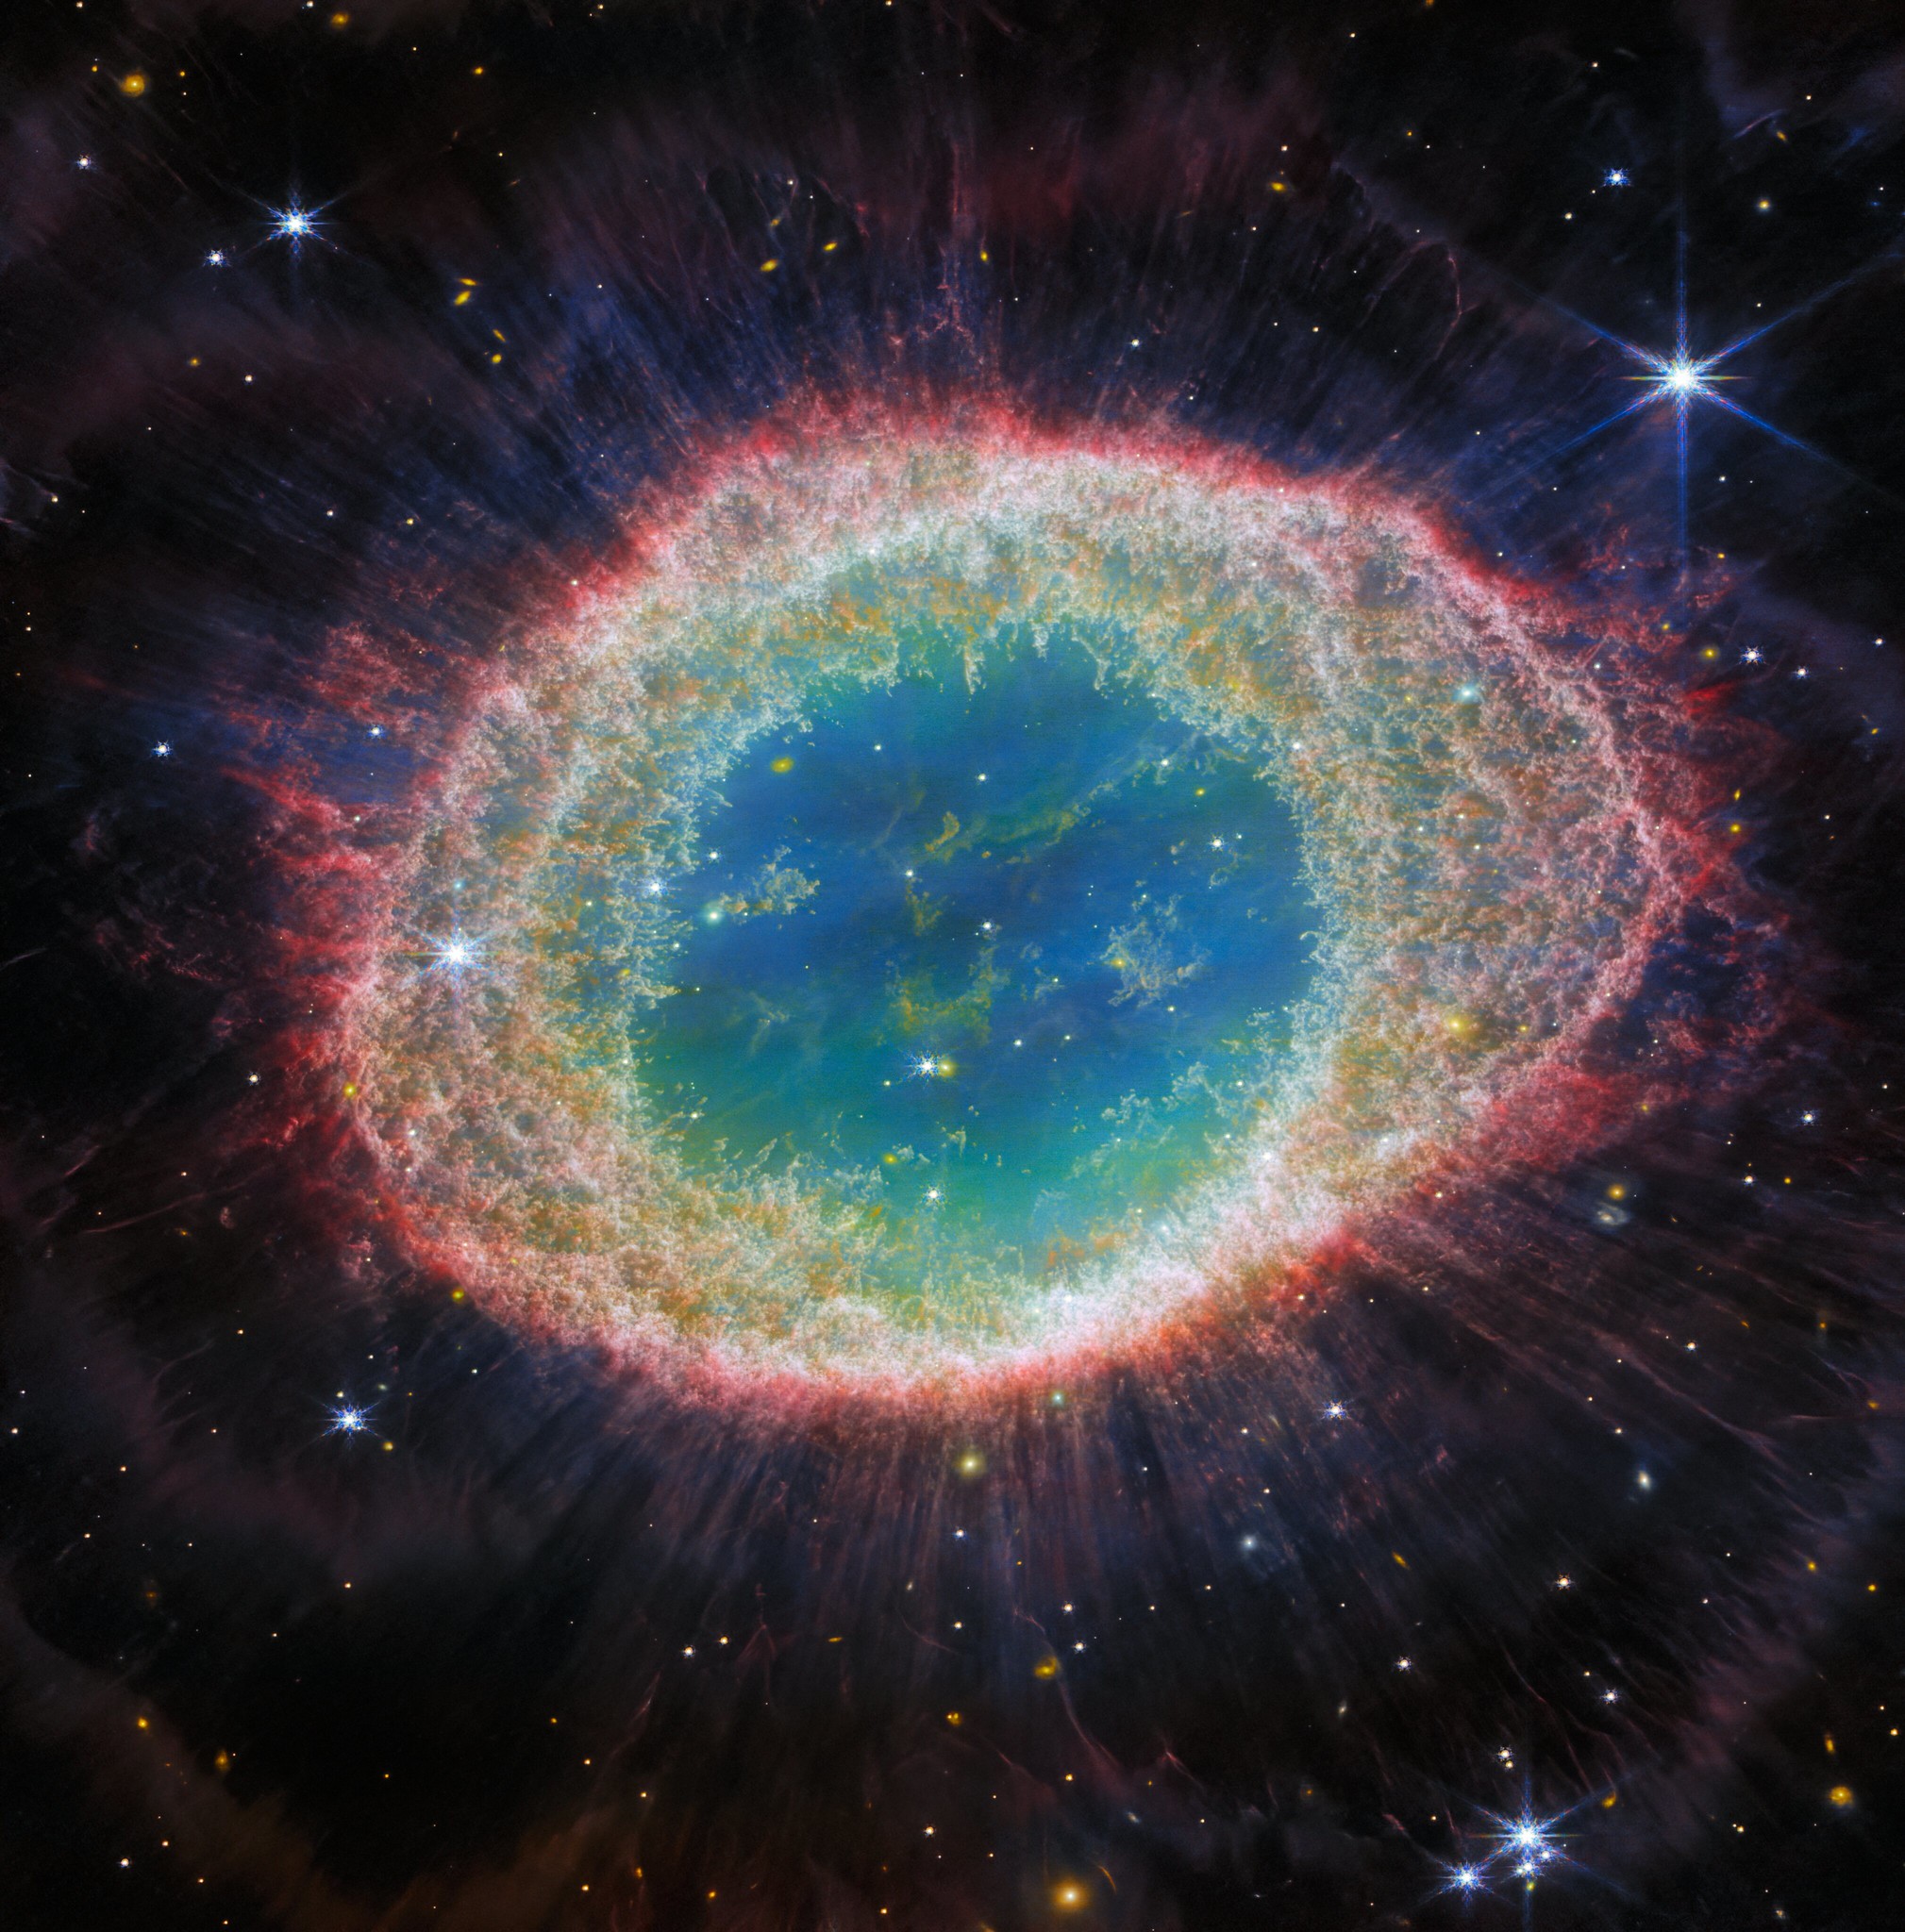 A detailed photo of a dying star at the center of the Ring Nebula